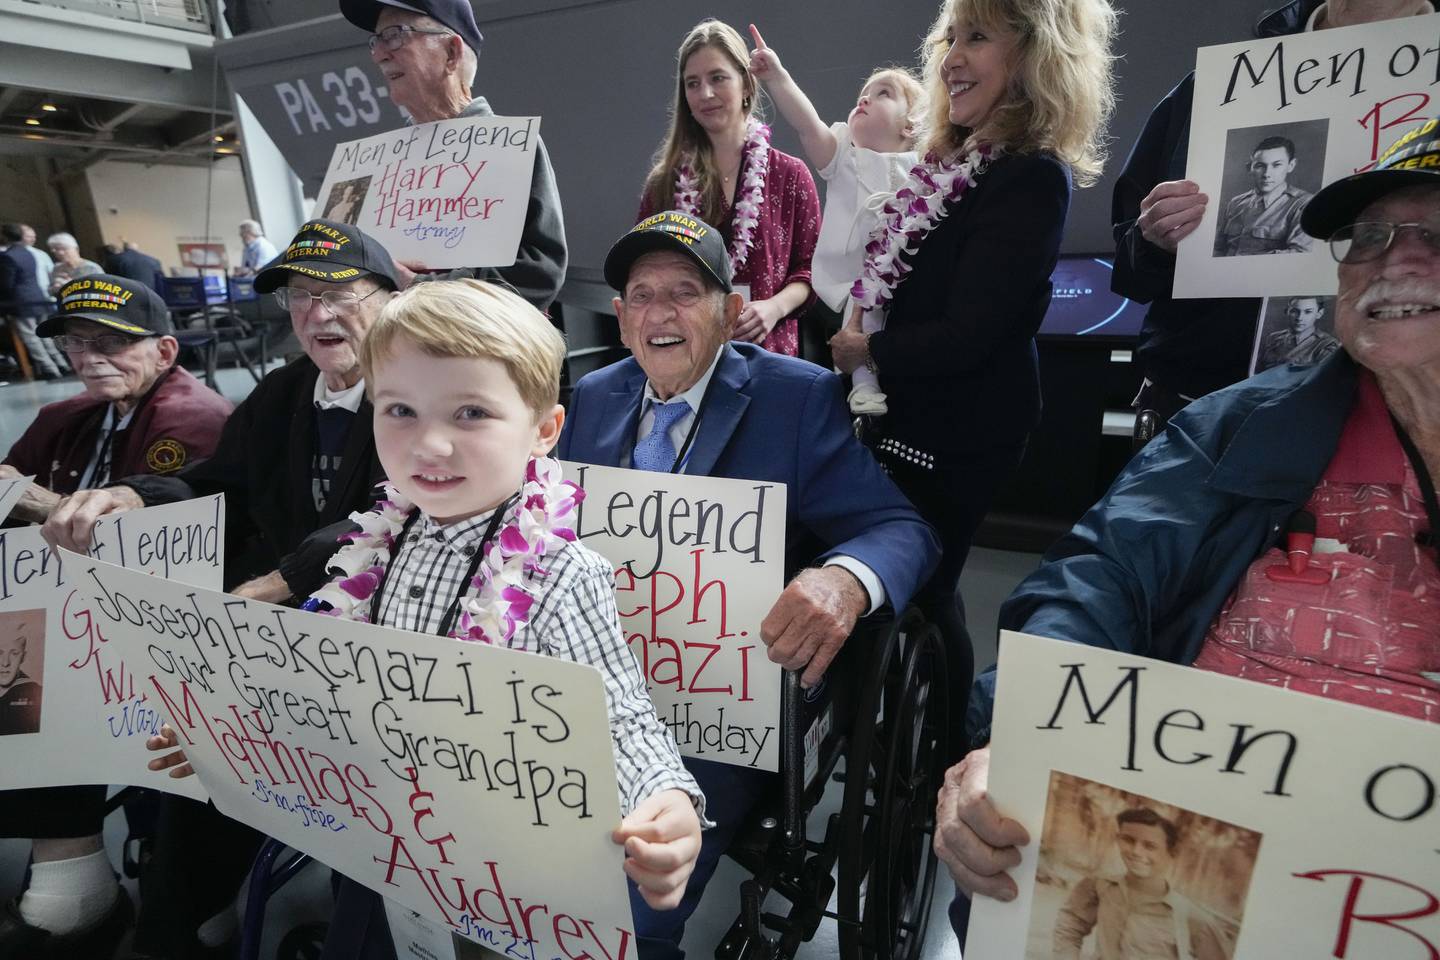 World War II veteran Joseph Eskenazi, who at 104 years and 11 months old is the oldest living veteran to survive the attack on Pearl Harbor, sits with fellow veterans, his great grandchildren Mathias, 4, Audrey, 1, and their grandmother Belinda Mastrangelo, at an event celebrating his upcoming 105th birthday at the National World War II Museum in New Orleans, Wednesday, Jan. 11, 2023.